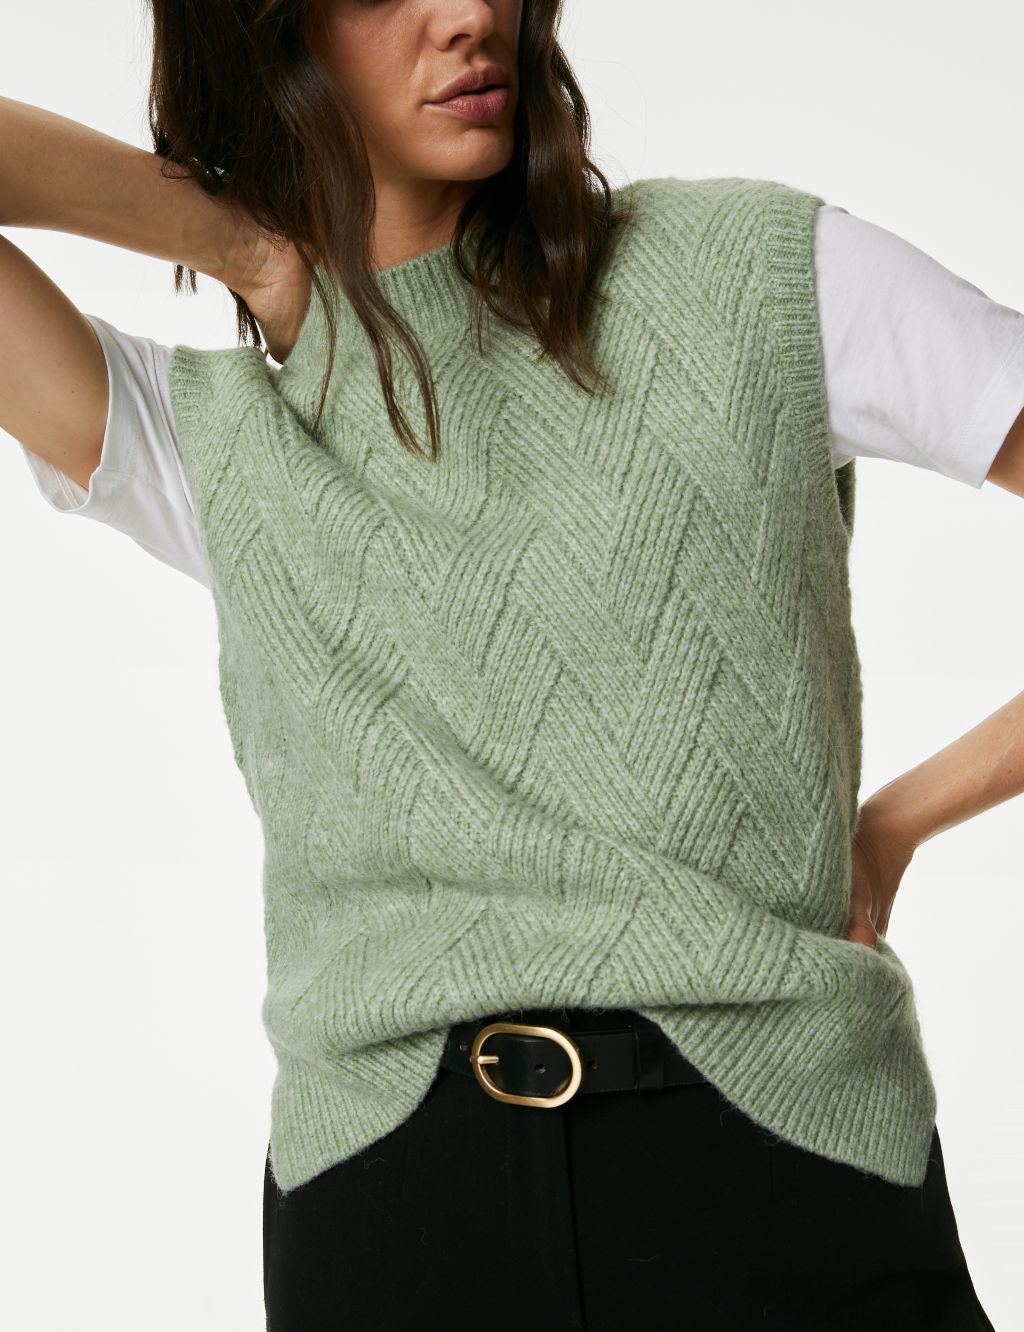 Textured Knitted Vest with Wool image 3